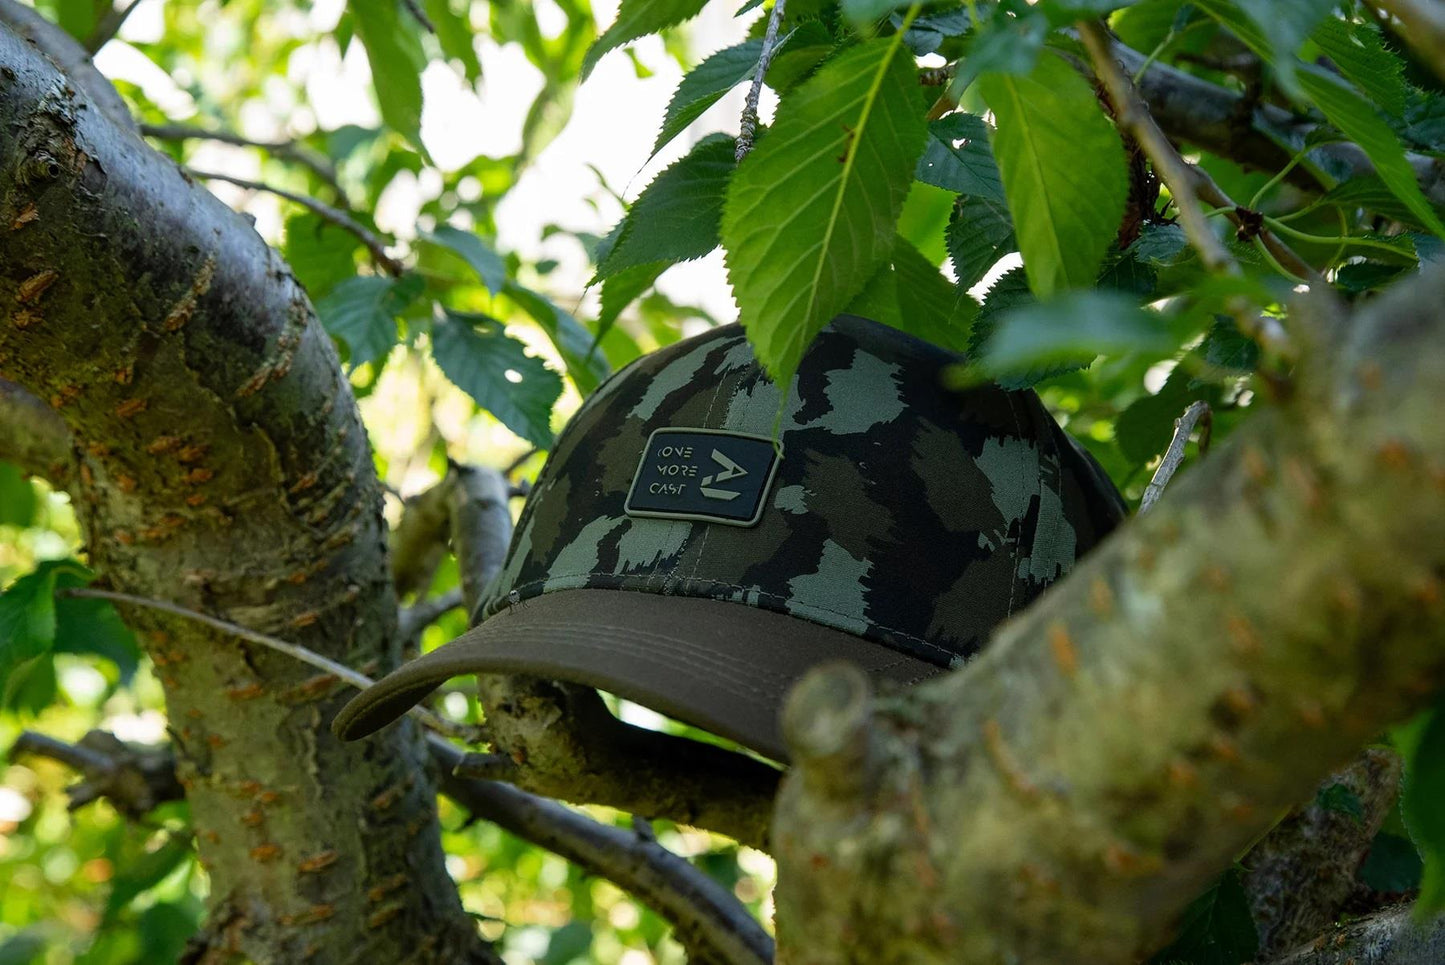 Casquette camouflage One More Cast Shadow